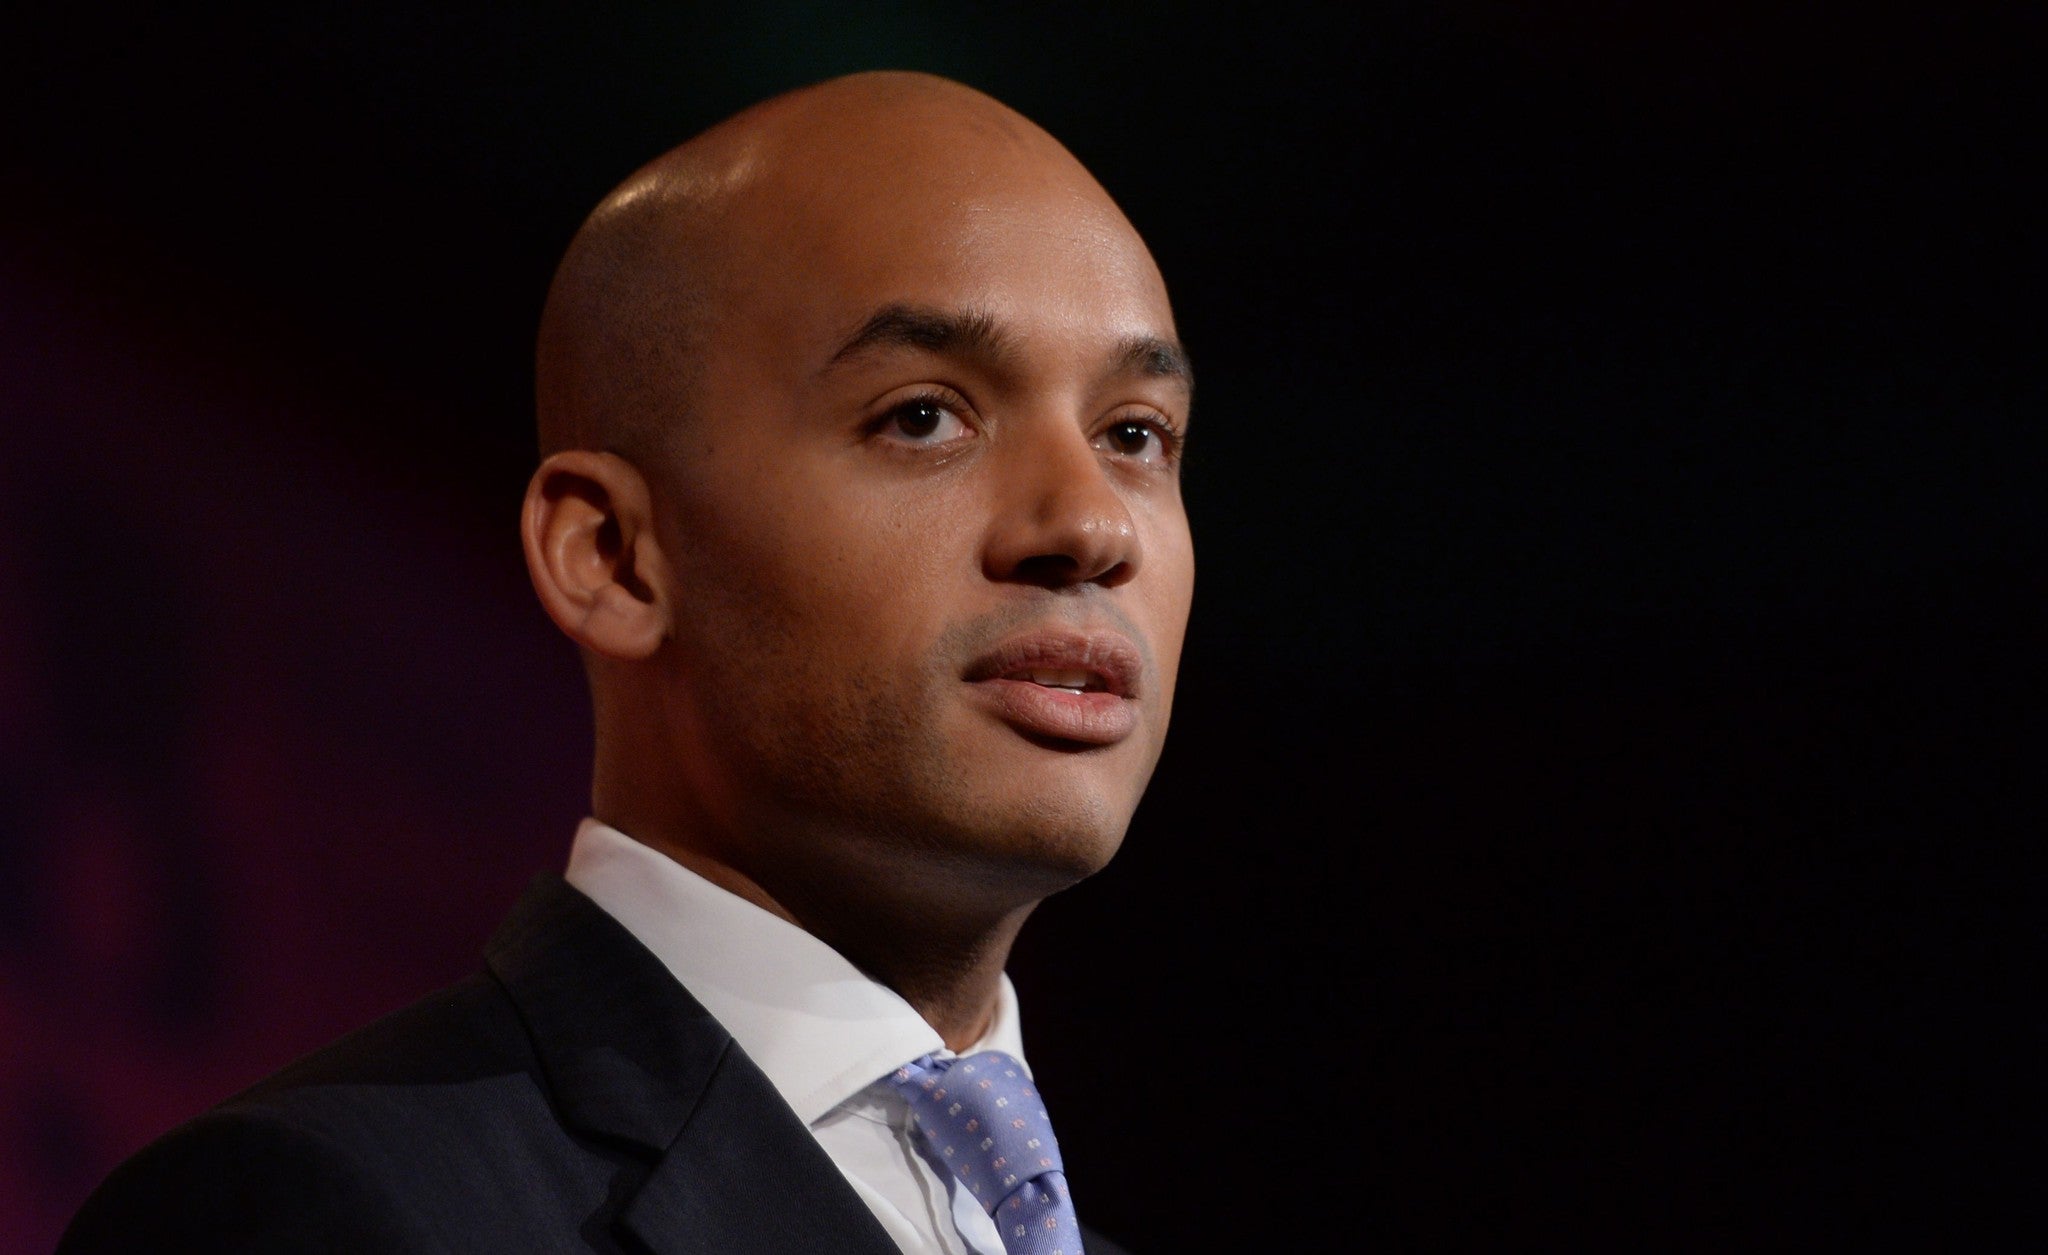 Chuka Umunna, who surprisingly withdrew from the race, admitted earlier this week that Labour had spent too much, while insisting the deficit was small.